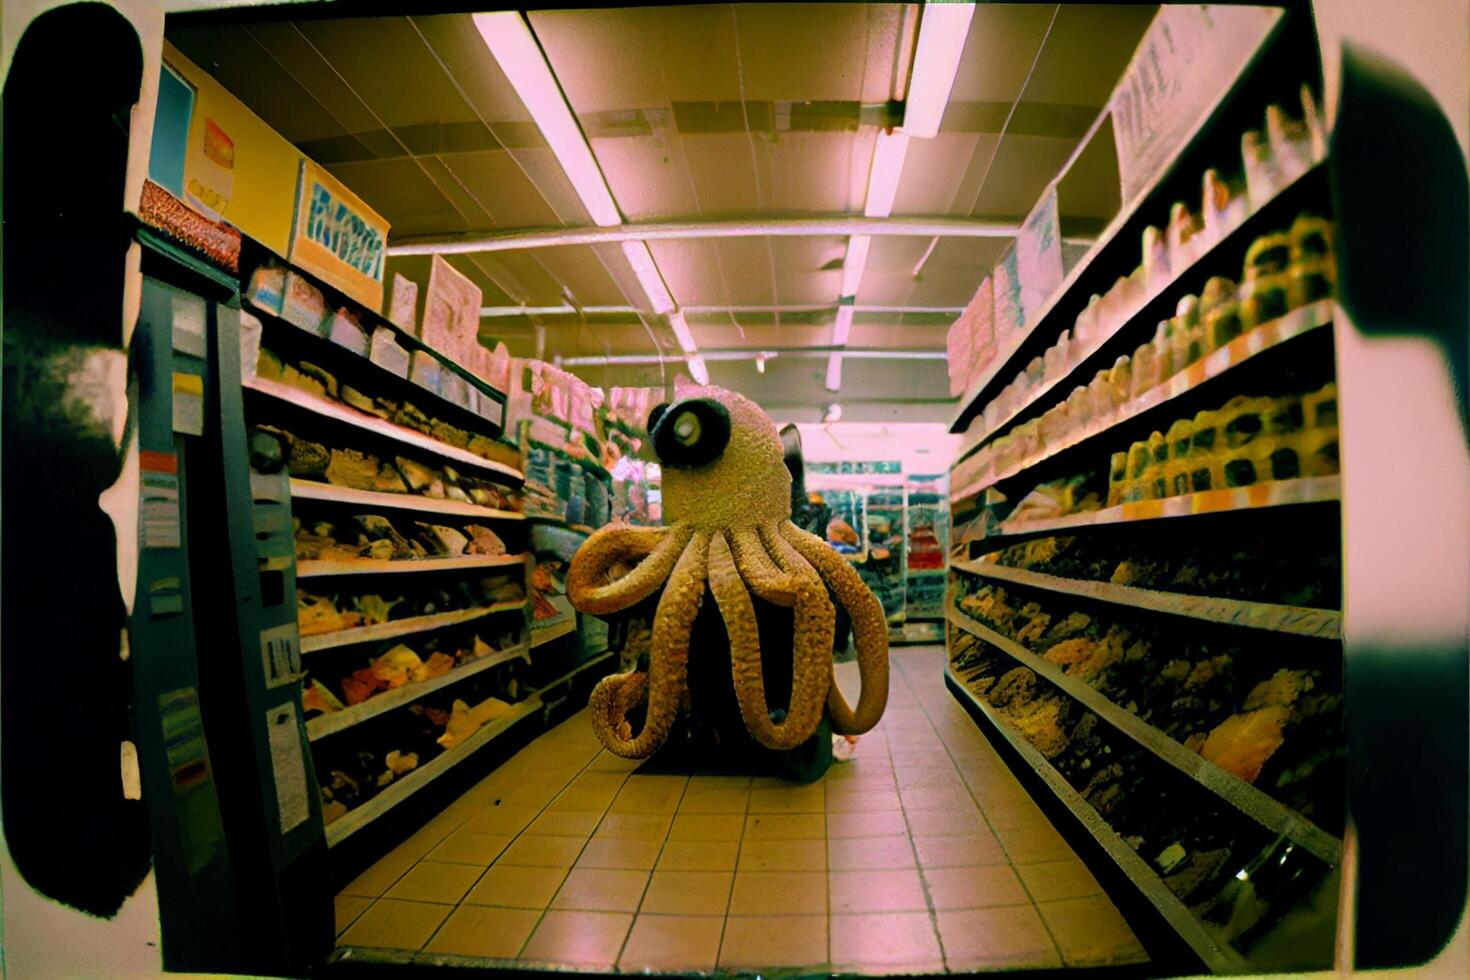 stuffed octopus sitting in the middle of a store aisle. . photo